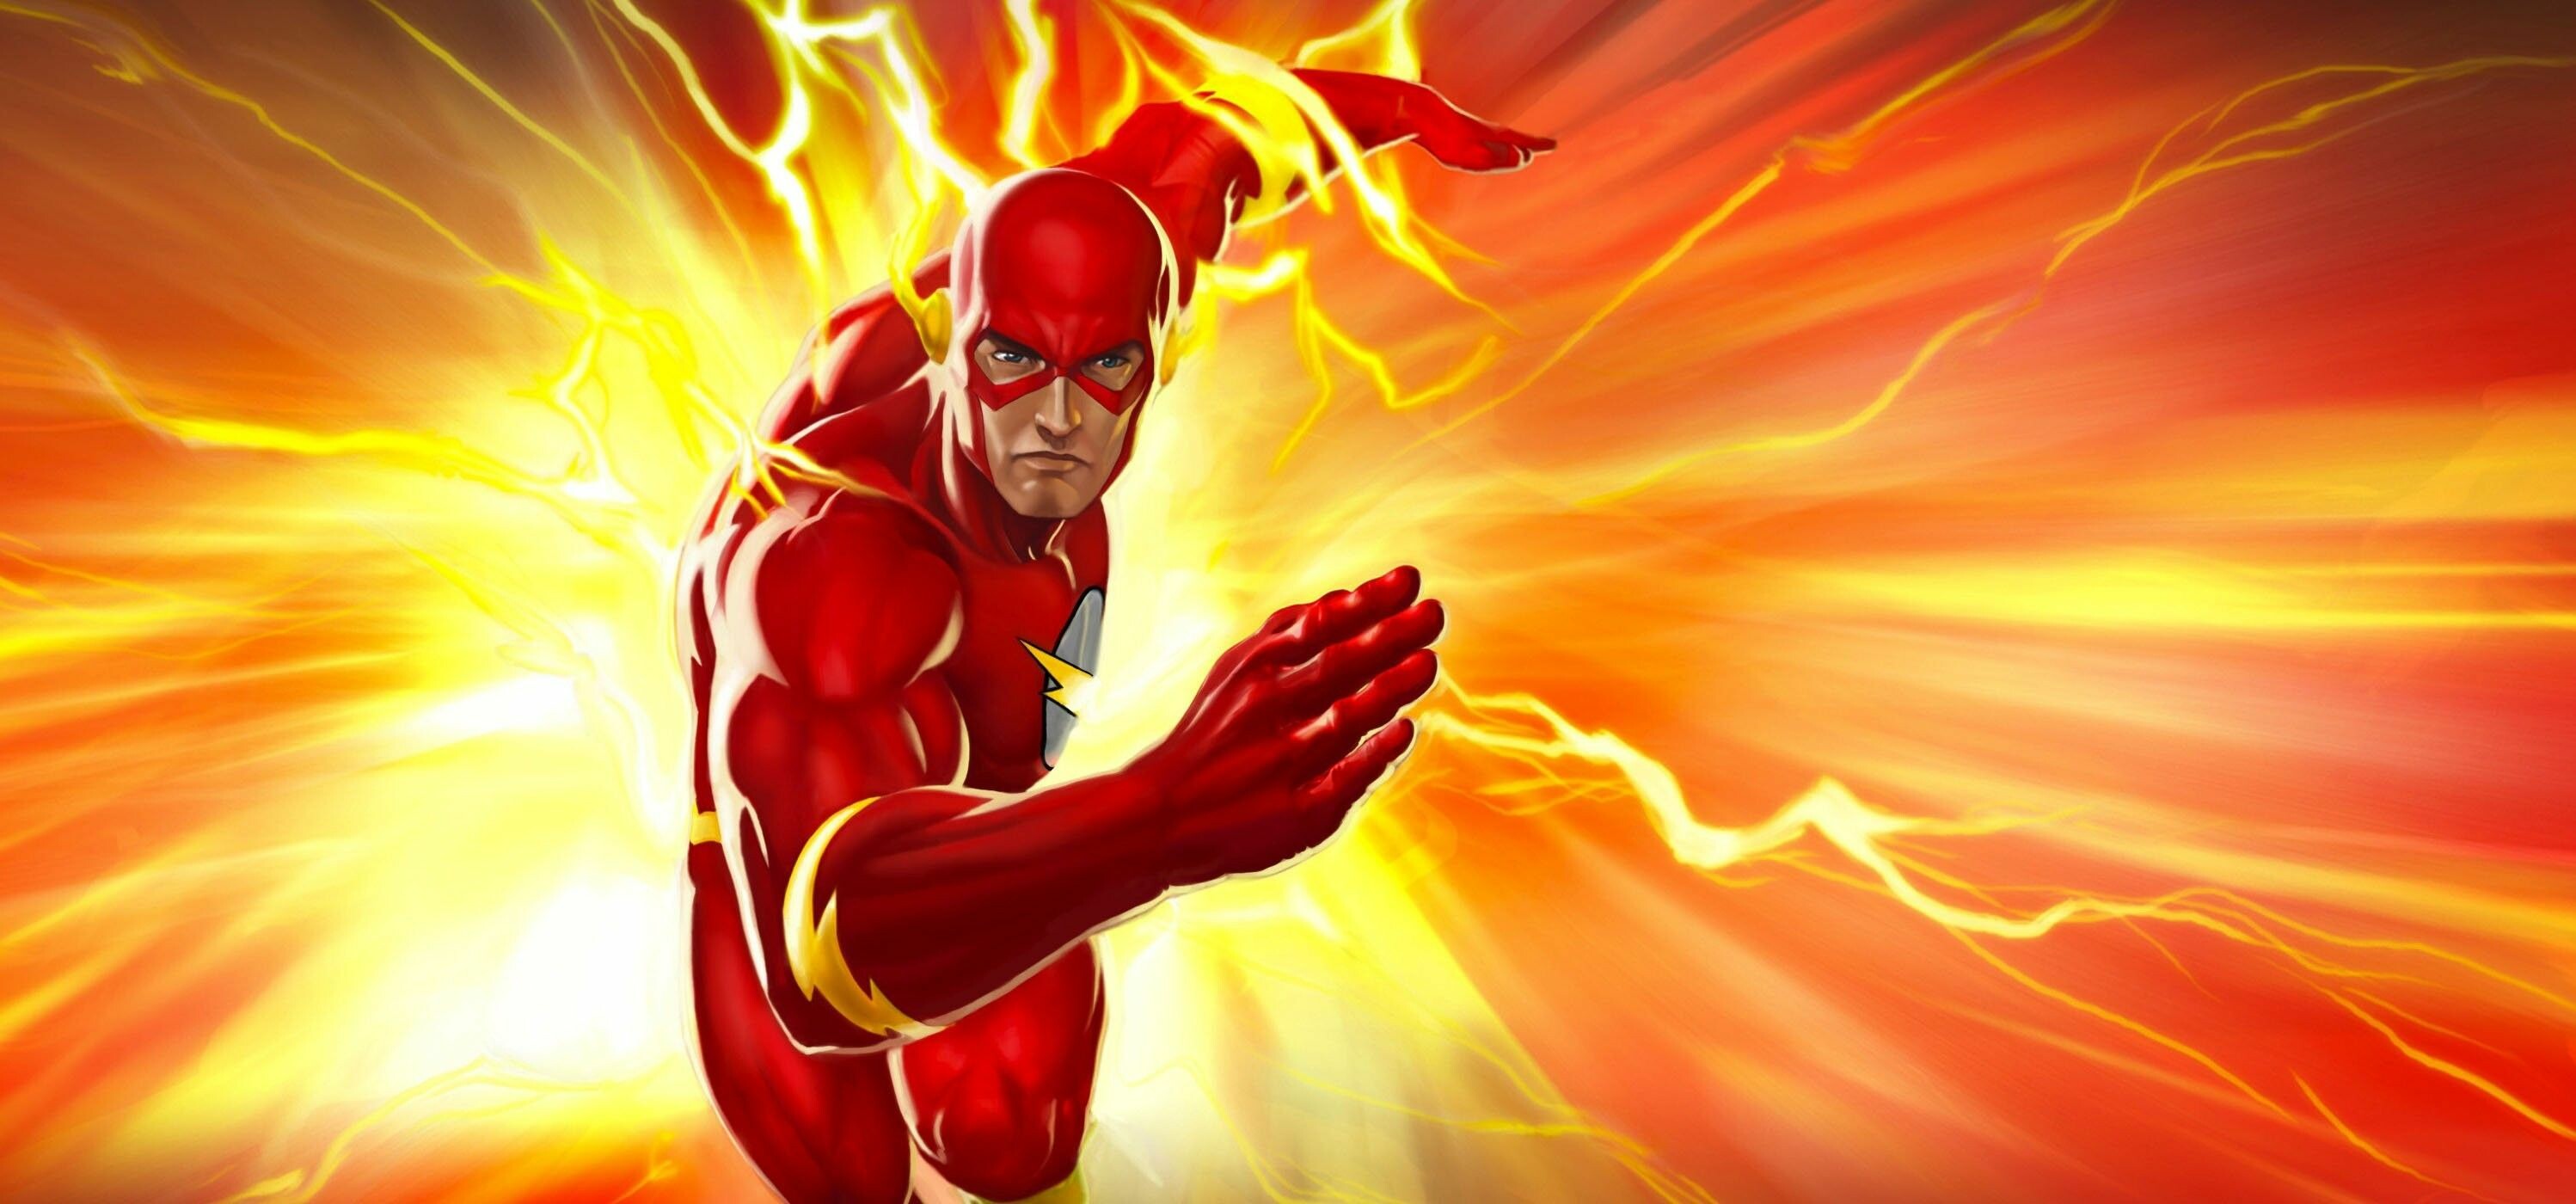 Flash (DC): Fictional character, appearing in American comic books, Gardner Fox. 3000x1400 Dual Screen Background.